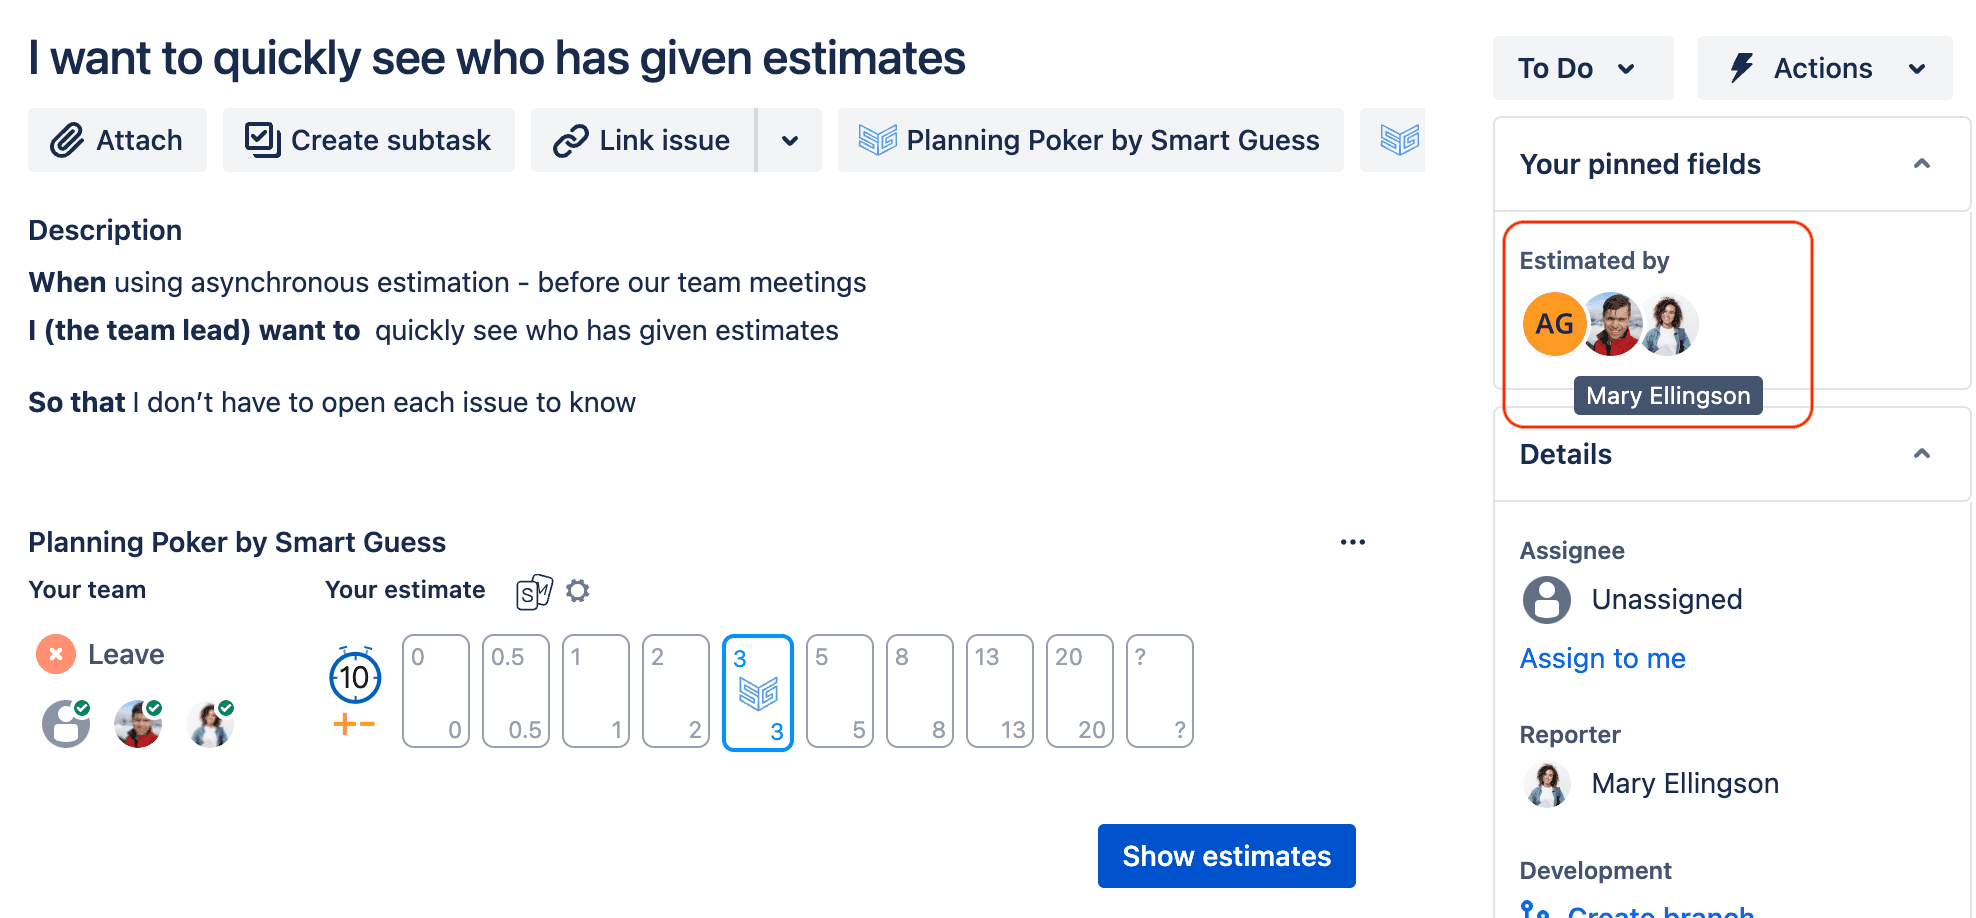 EstimateBy field can be found in the Jira Issue View